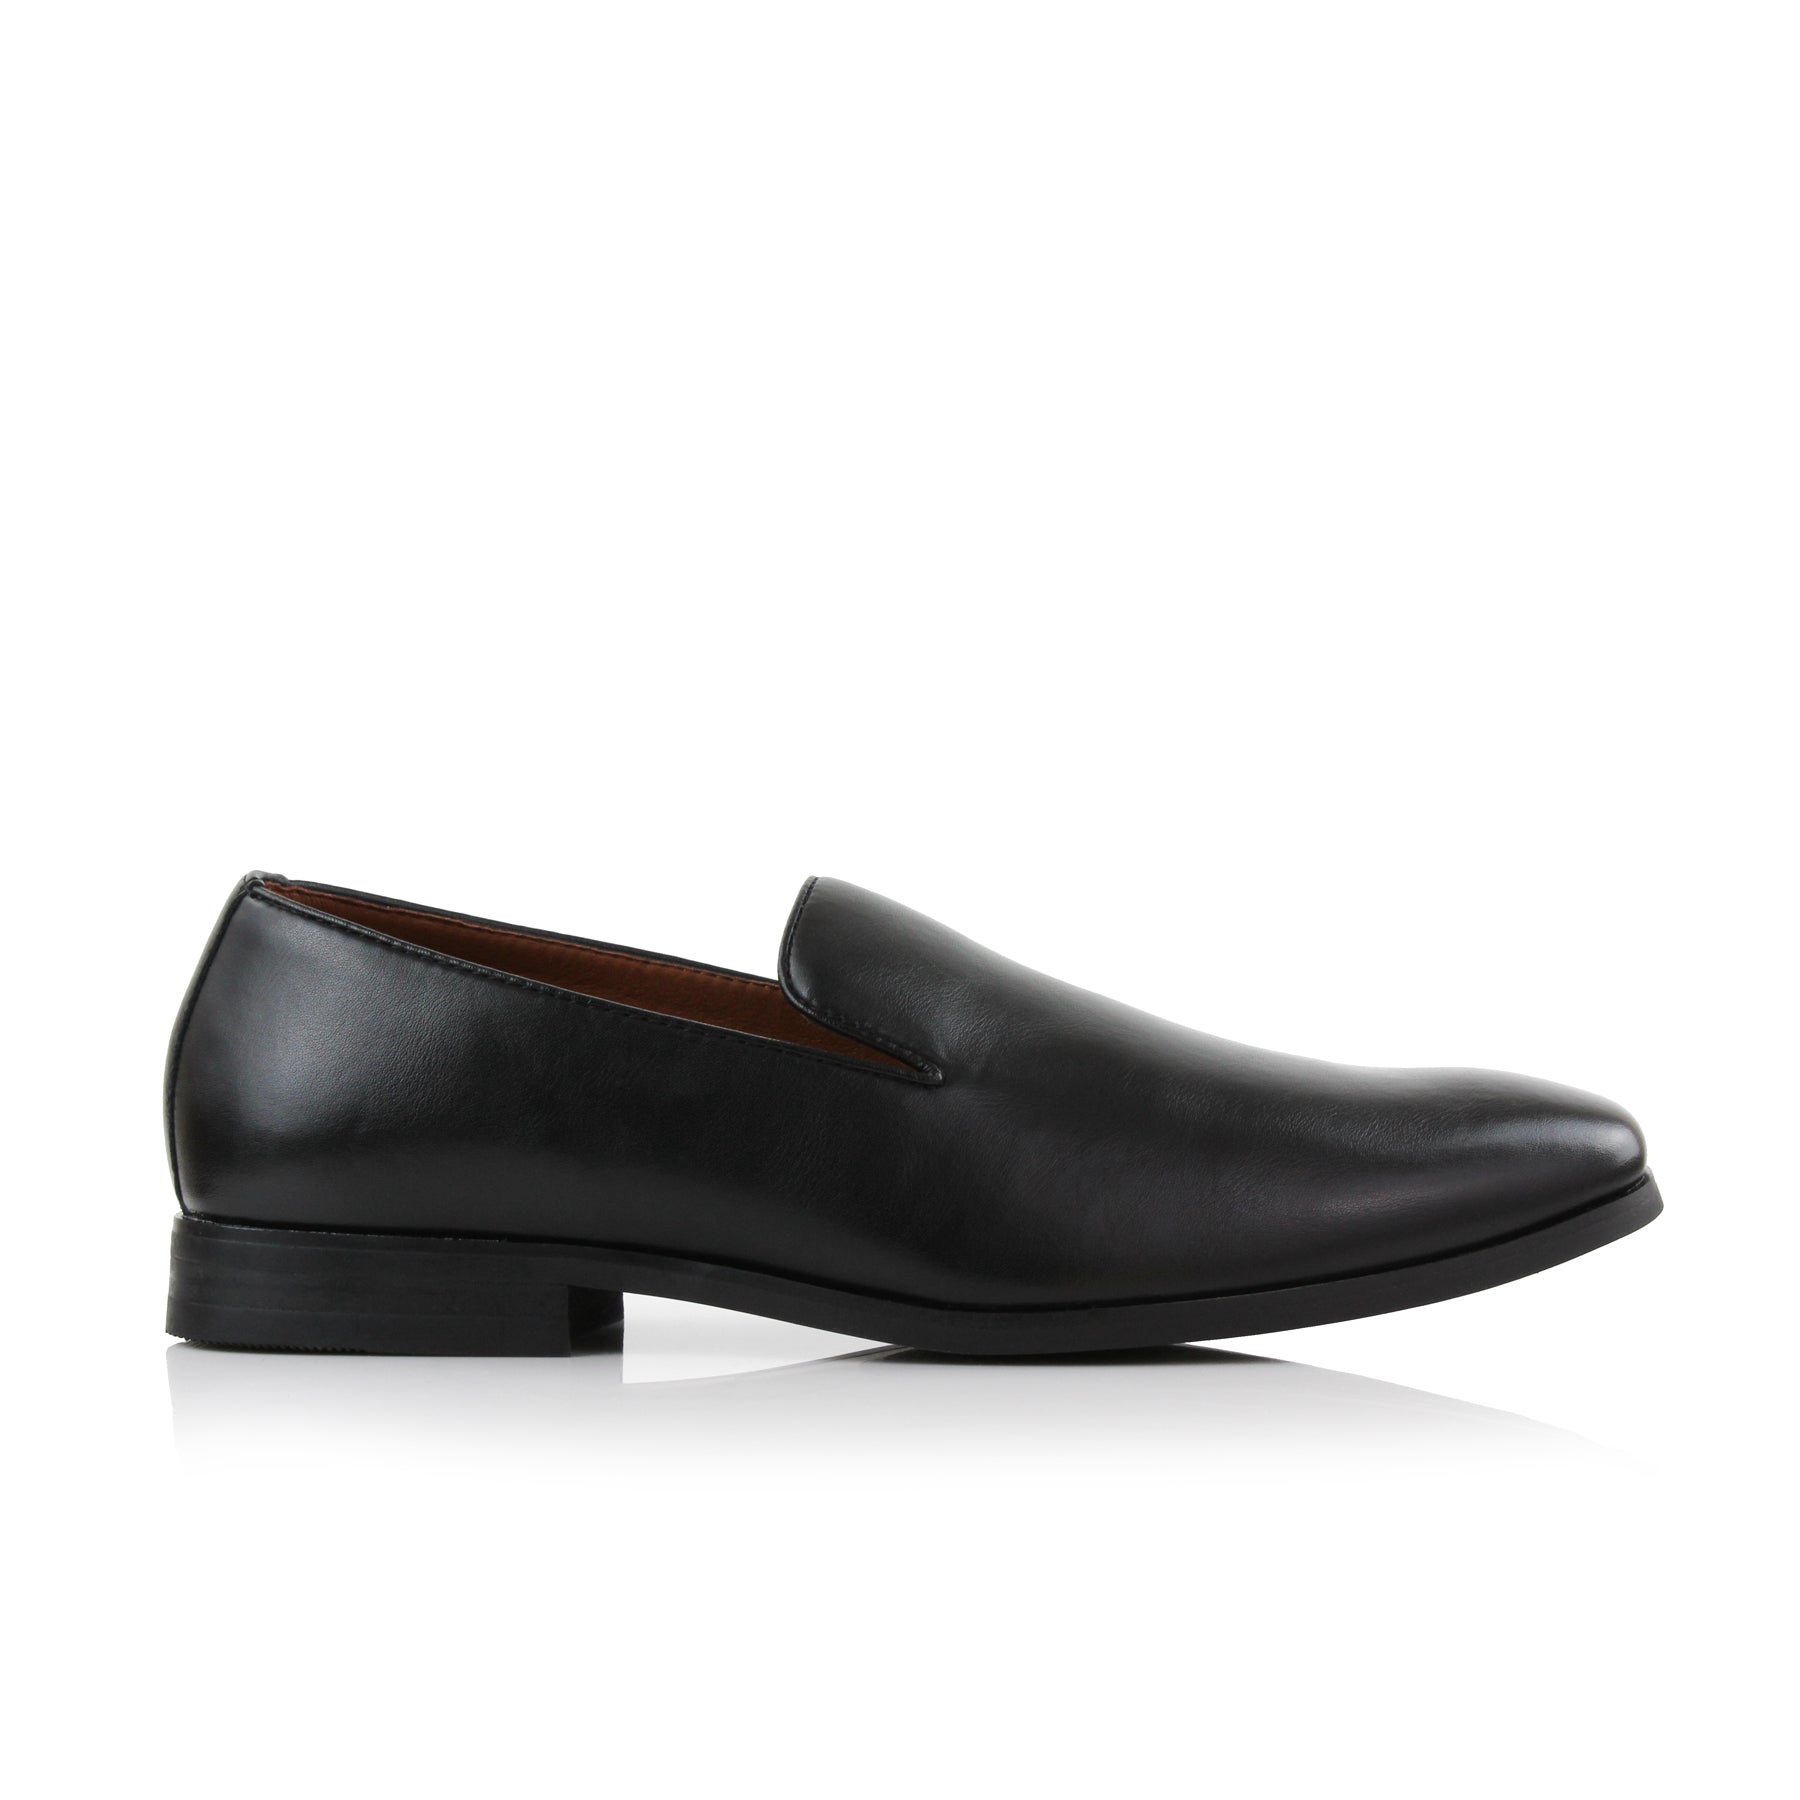 Wholecut Loafers | Clyde by Ferro Aldo | Conal Footwear | Outer Side Angle View